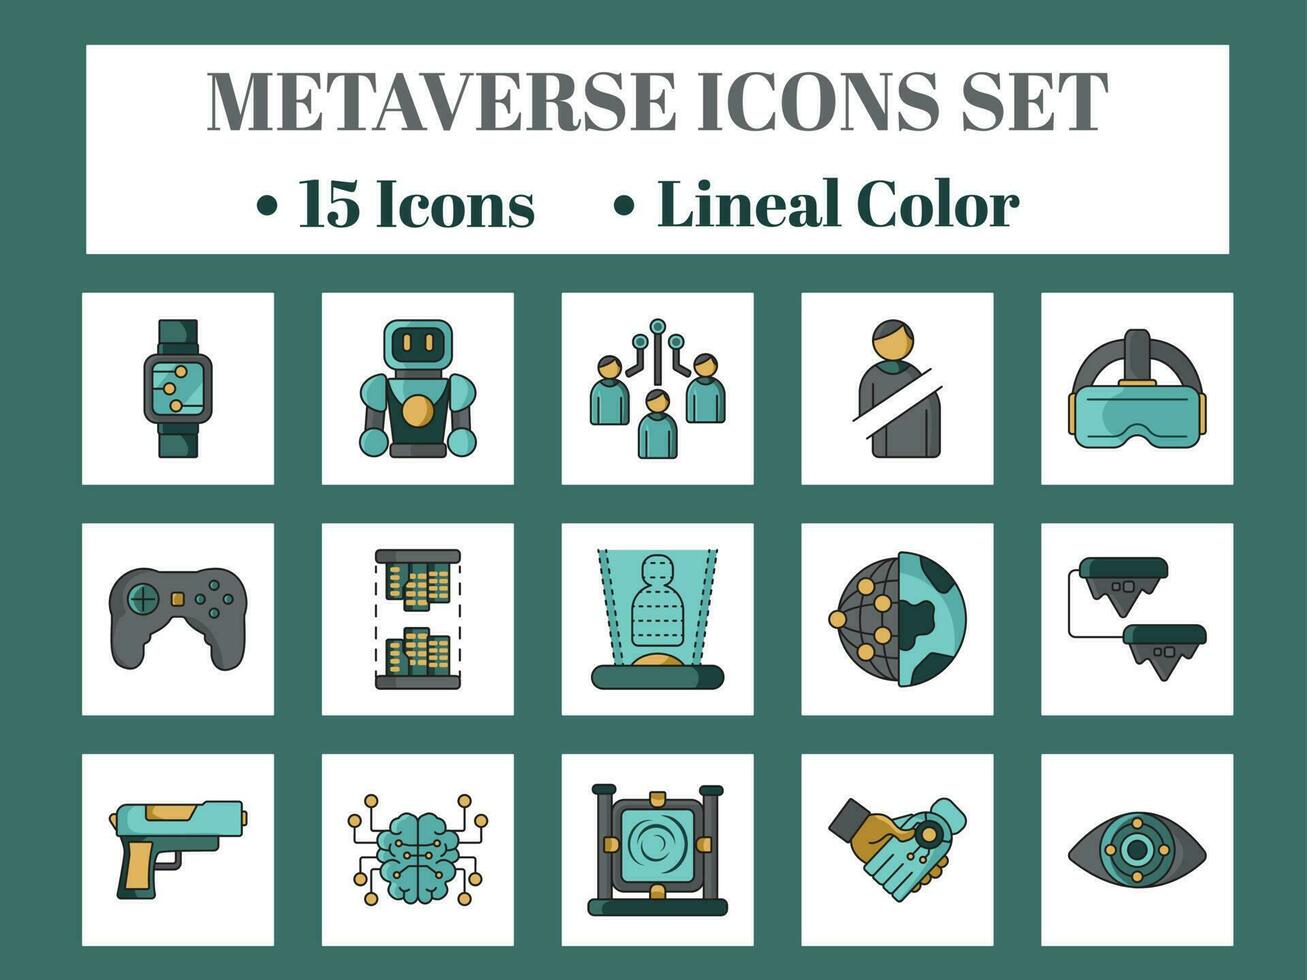 Flat Style Metaverse 15 Icon Set On White And Teal Square Background. vector